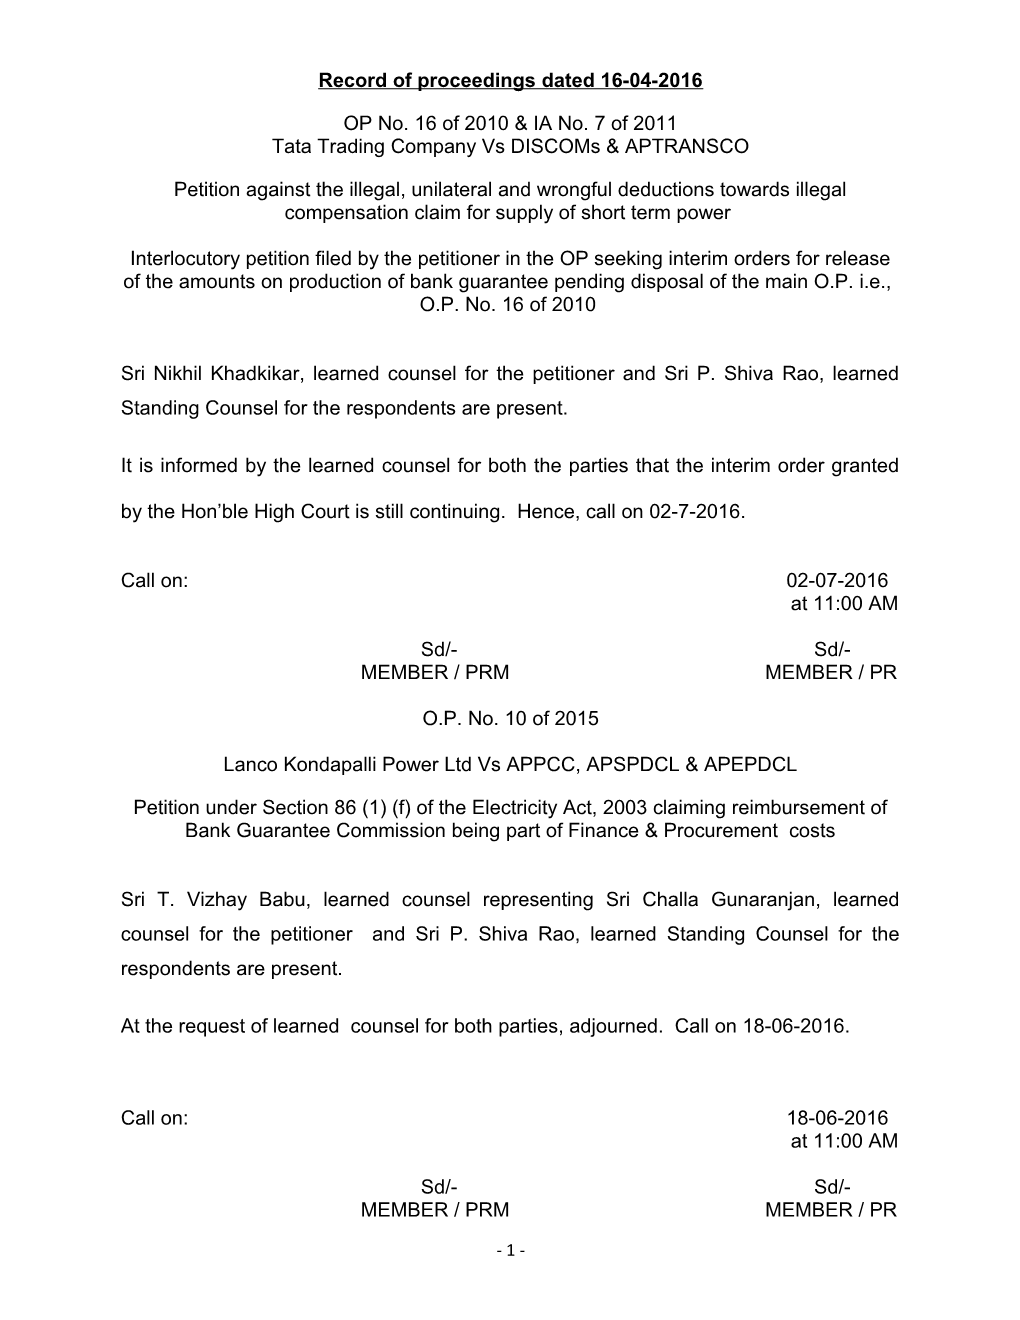 Record of Proceedings Dated 16-04-2016